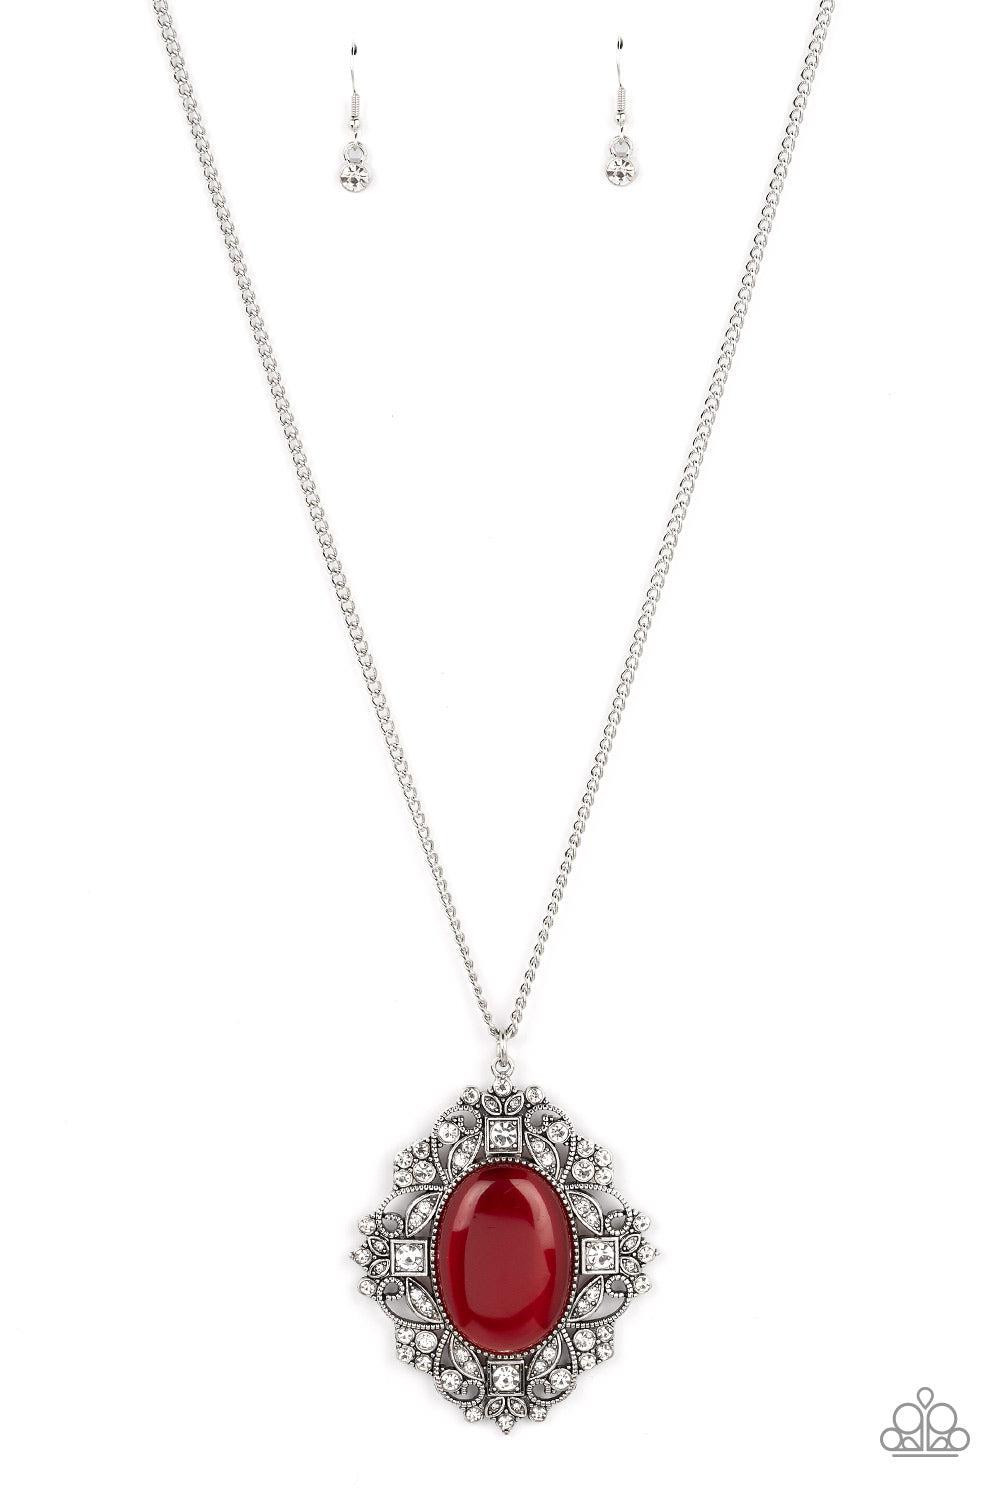 Dream Board Dazzle Red Cat's Eye Stone Necklace - Paparazzi Accessories- lightbox - CarasShop.com - $5 Jewelry by Cara Jewels